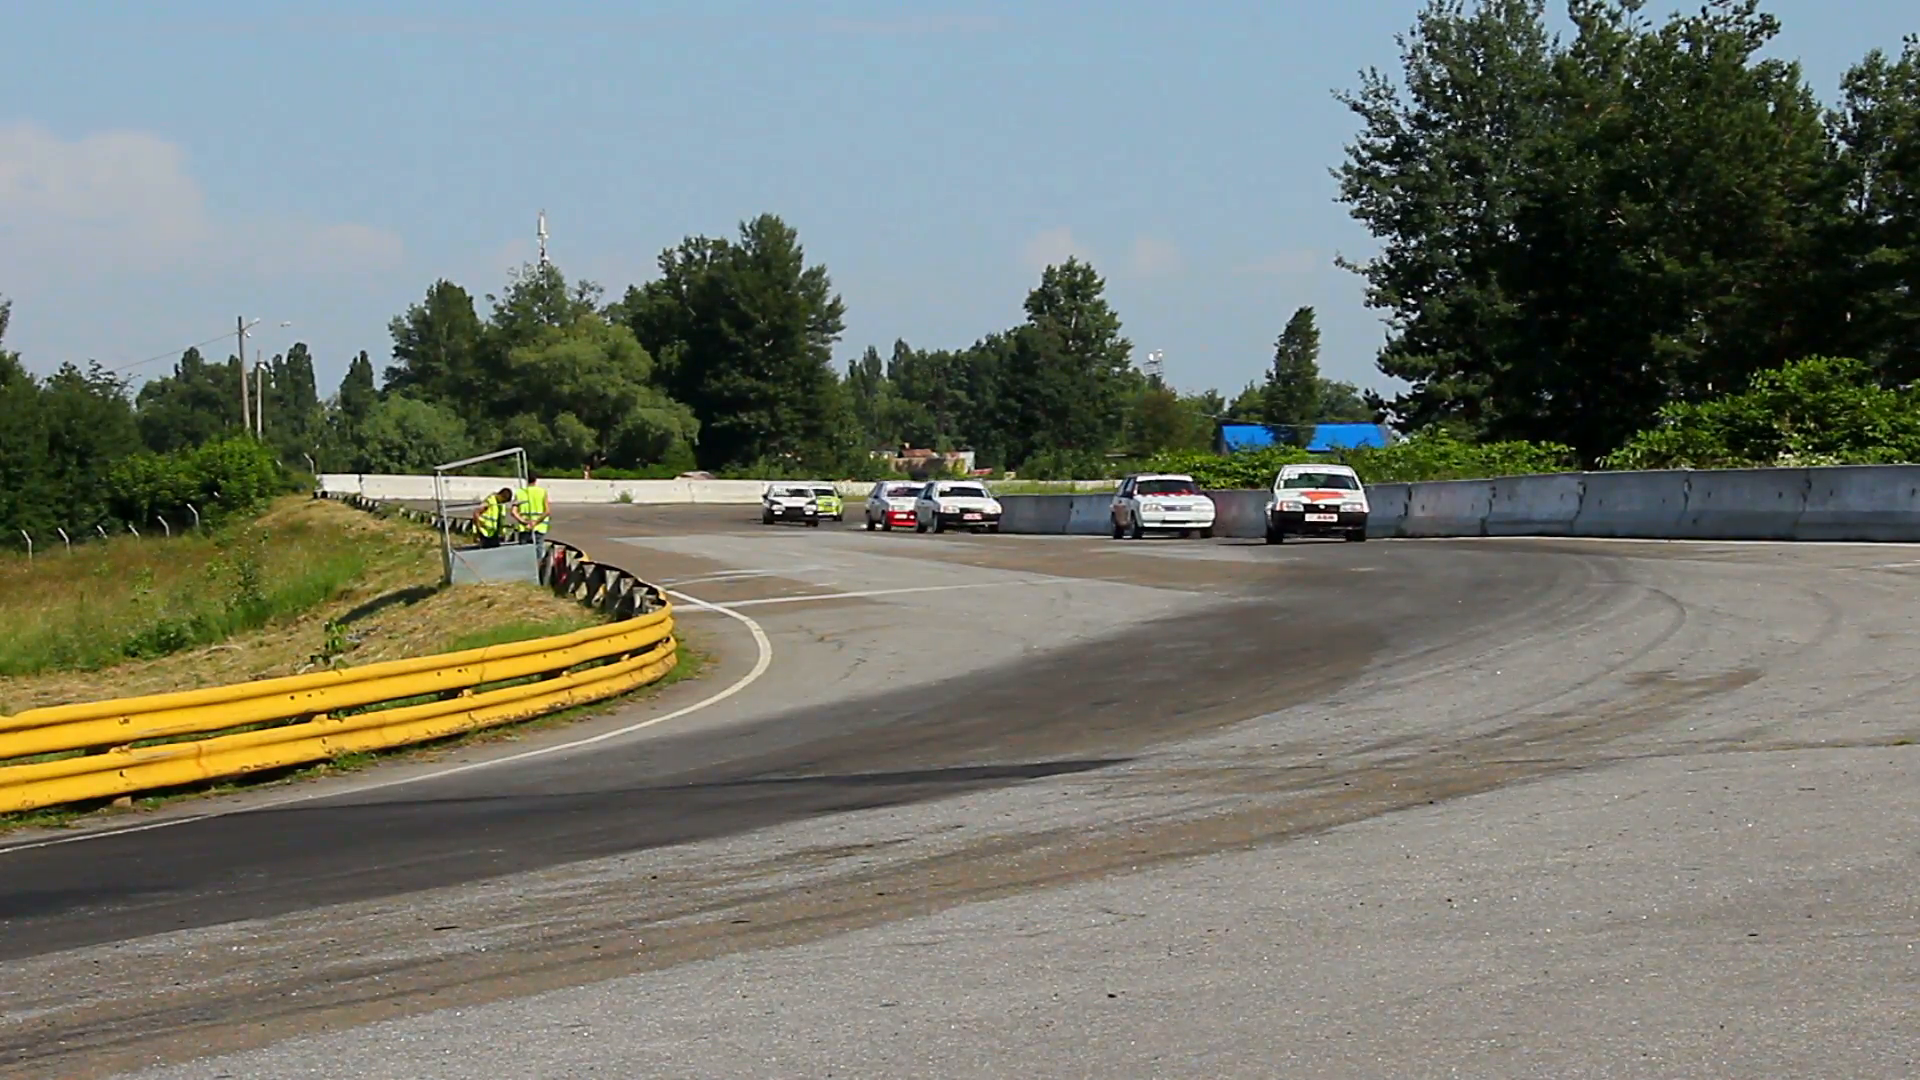 Group of racecars rushing, taking sharp turn, competing for cup ...